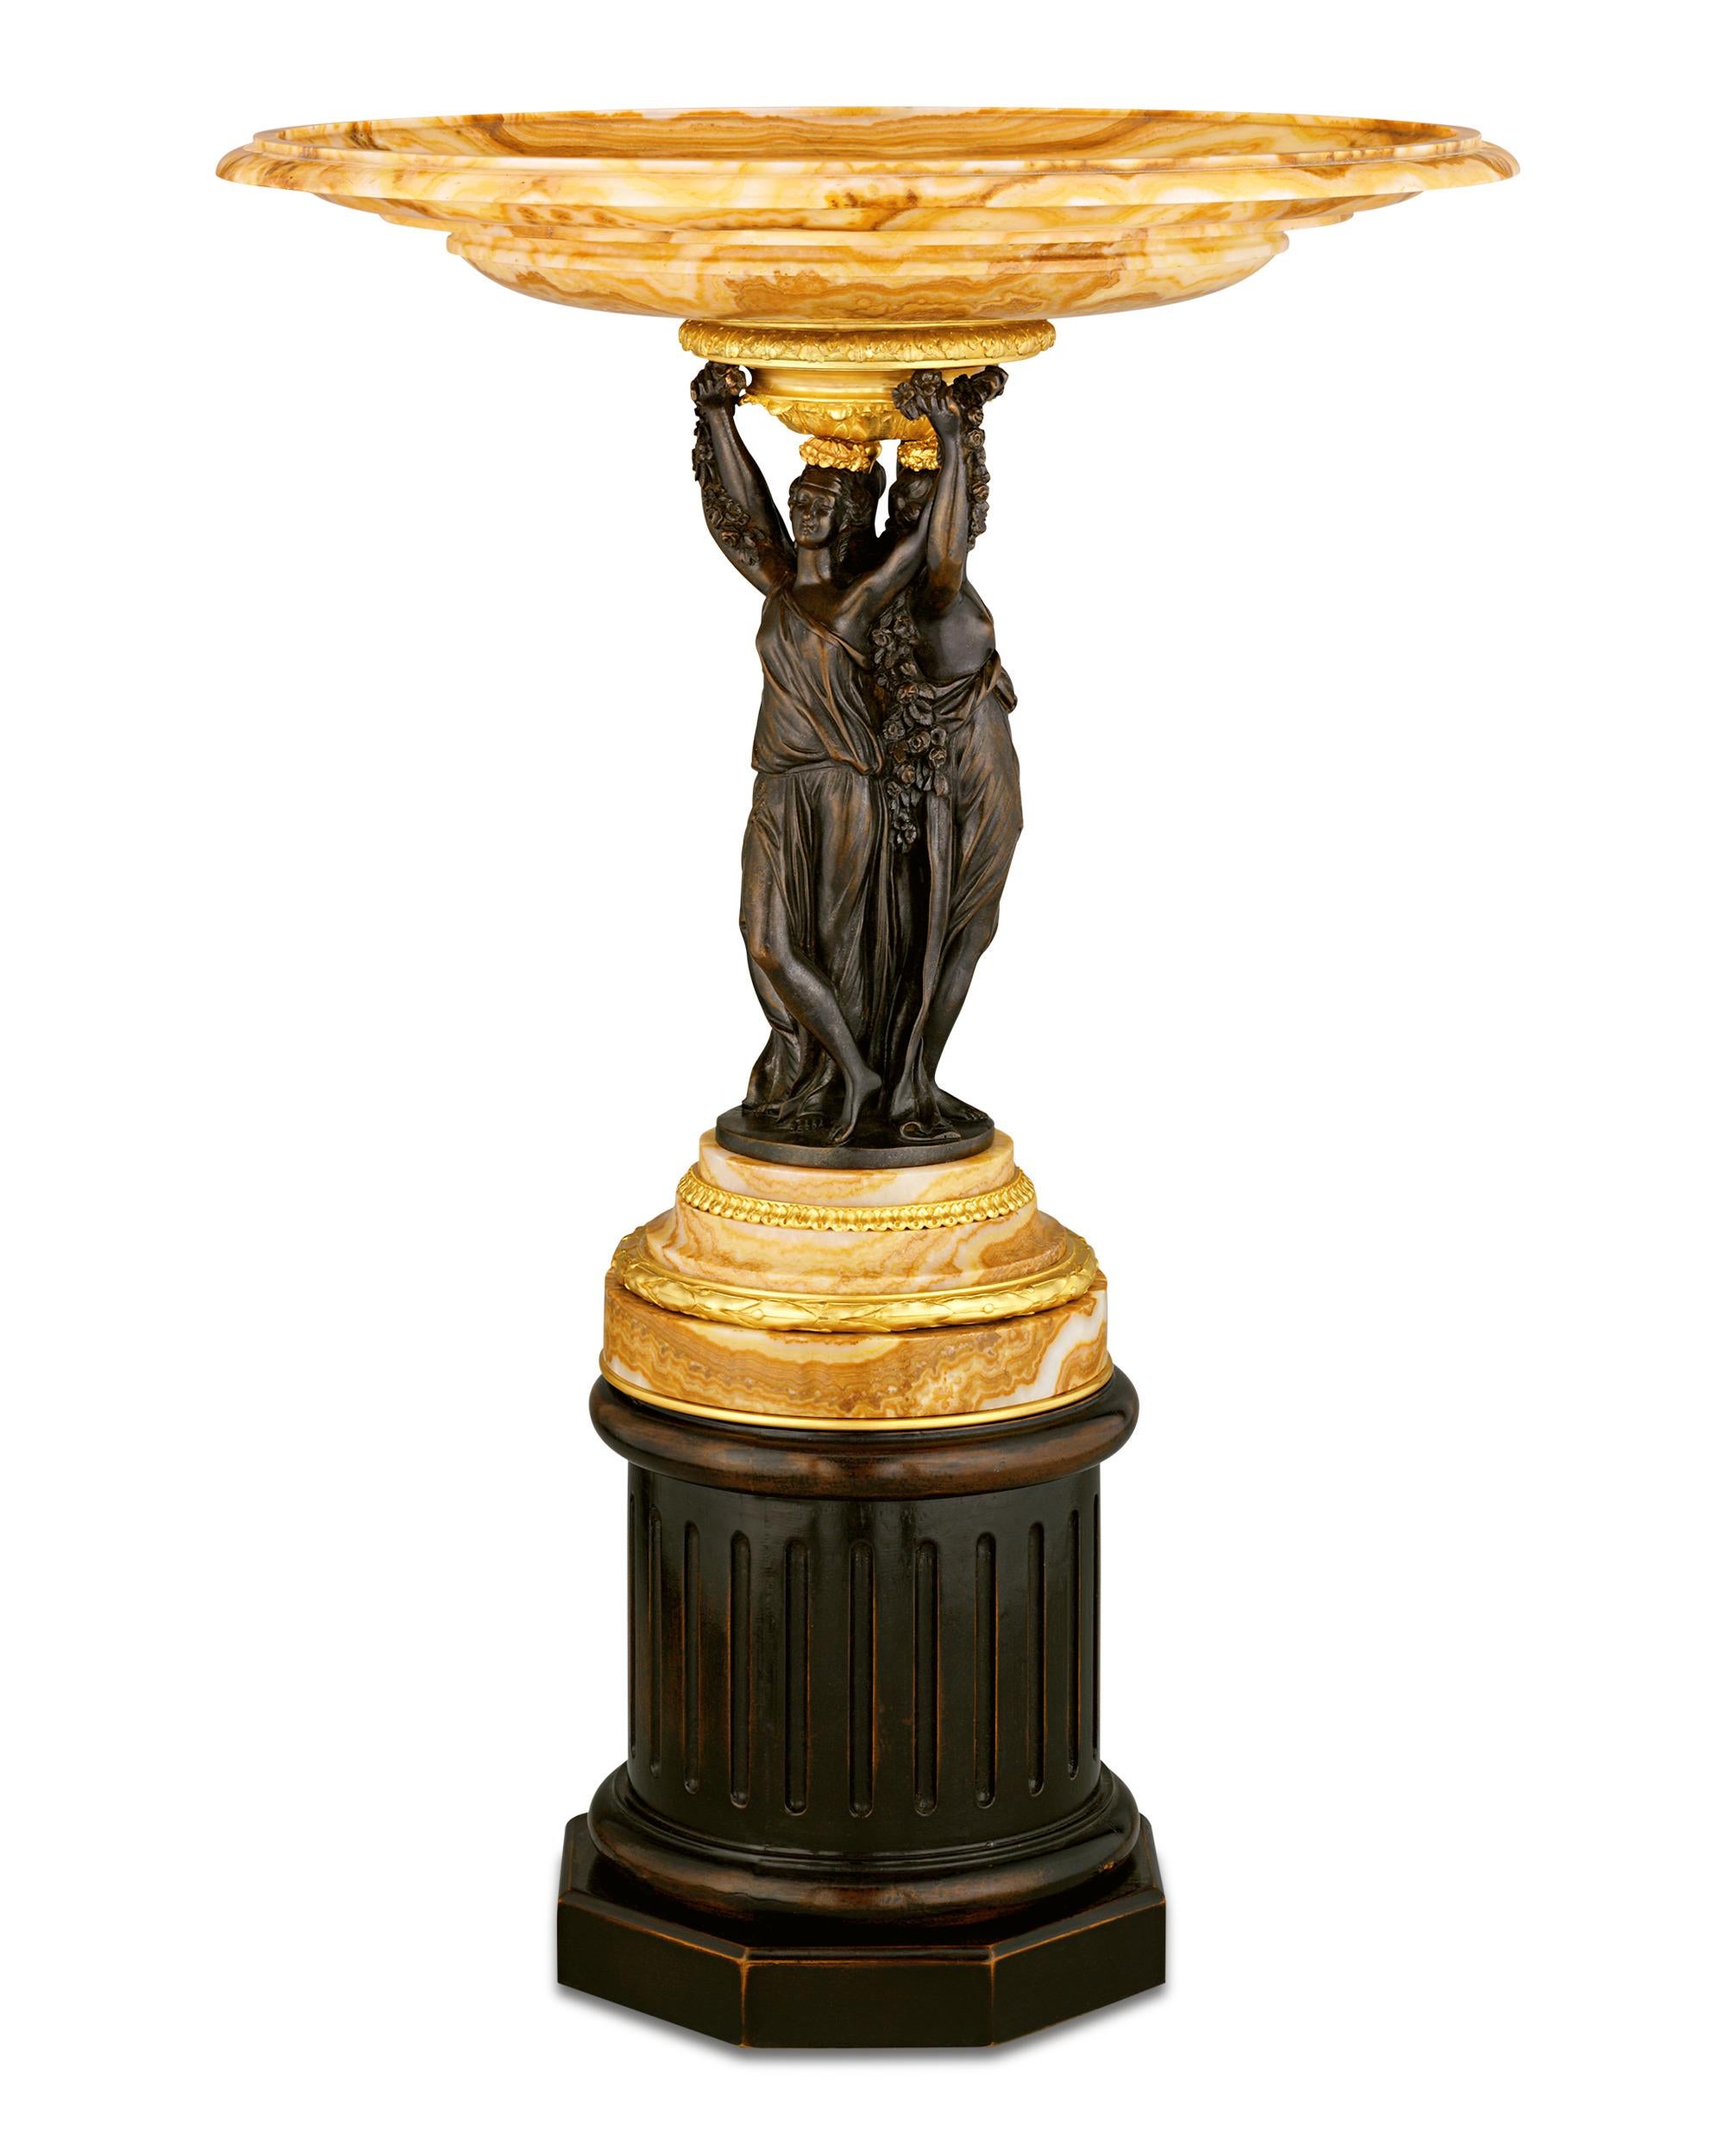 This exceptional early 19th-century centerpiece is crafted of exquisite Alabastro Fiorito marble and bronze. Alabastro Fiorito was one of the most prestigious marbles, used widely in Roman architecture and ornamentation. Beloved for its distinct